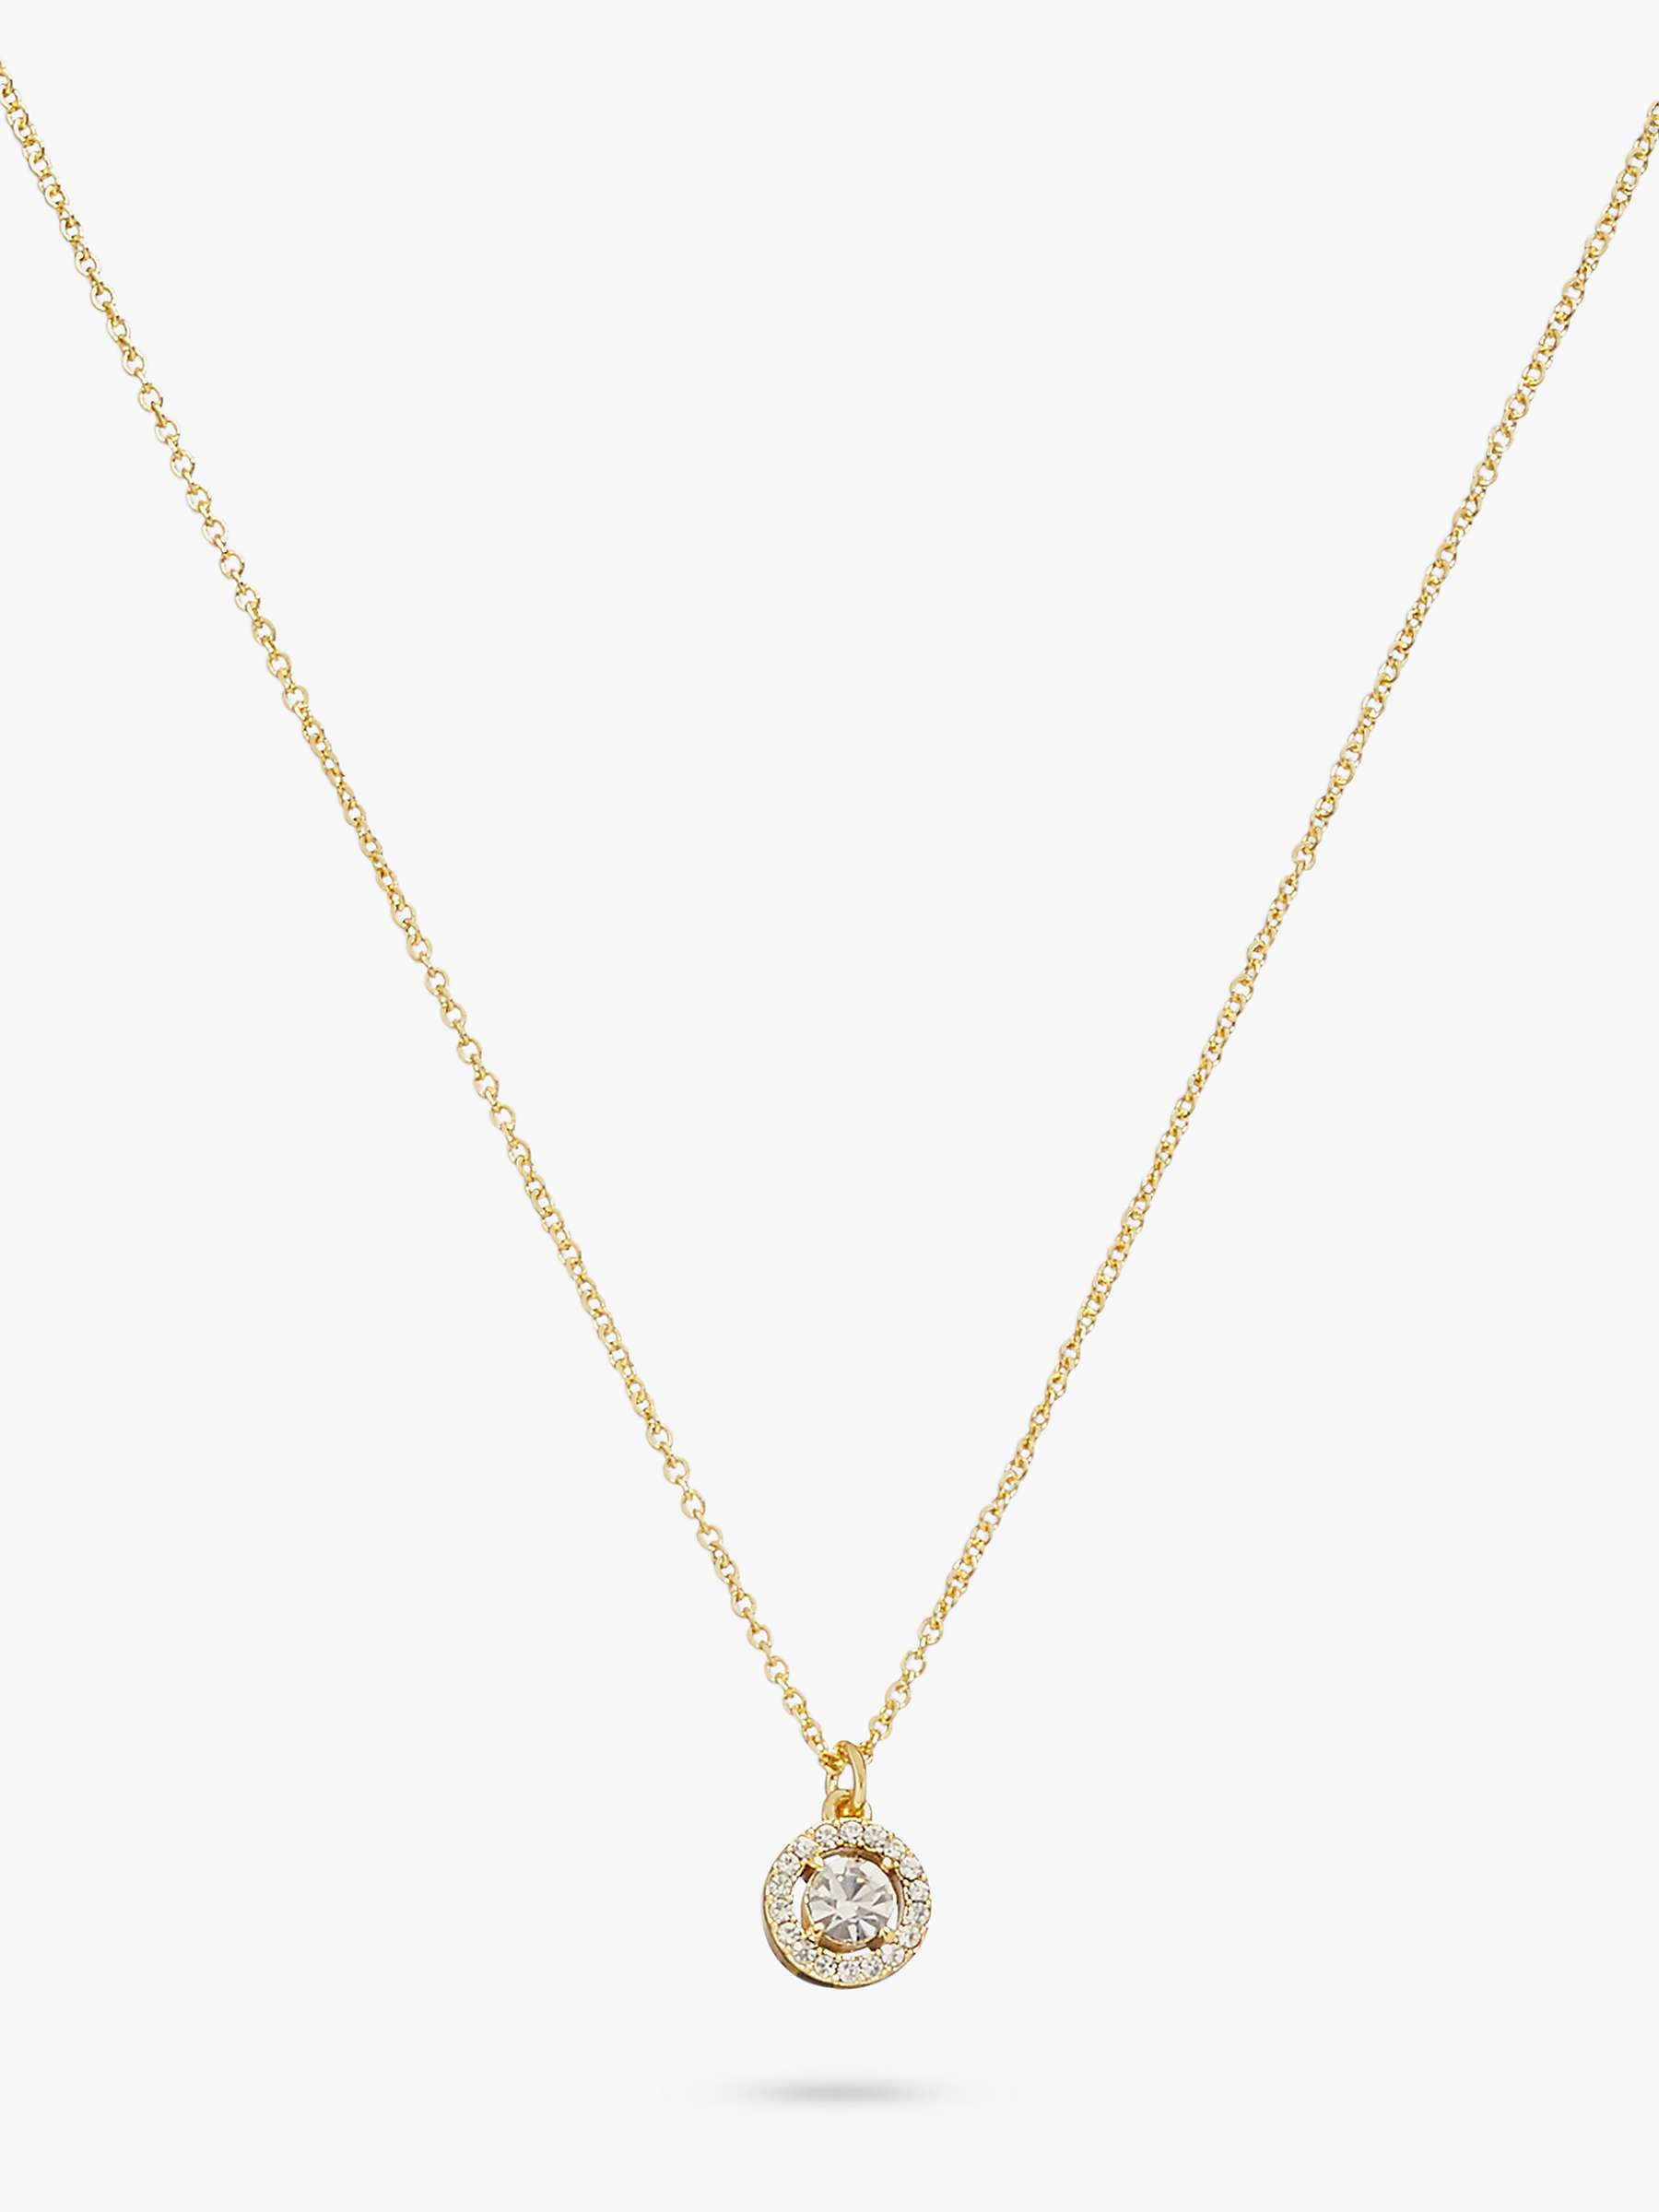 Buy Coach Crystal Halo Pave Pendant Necklace, Gold Online at johnlewis.com